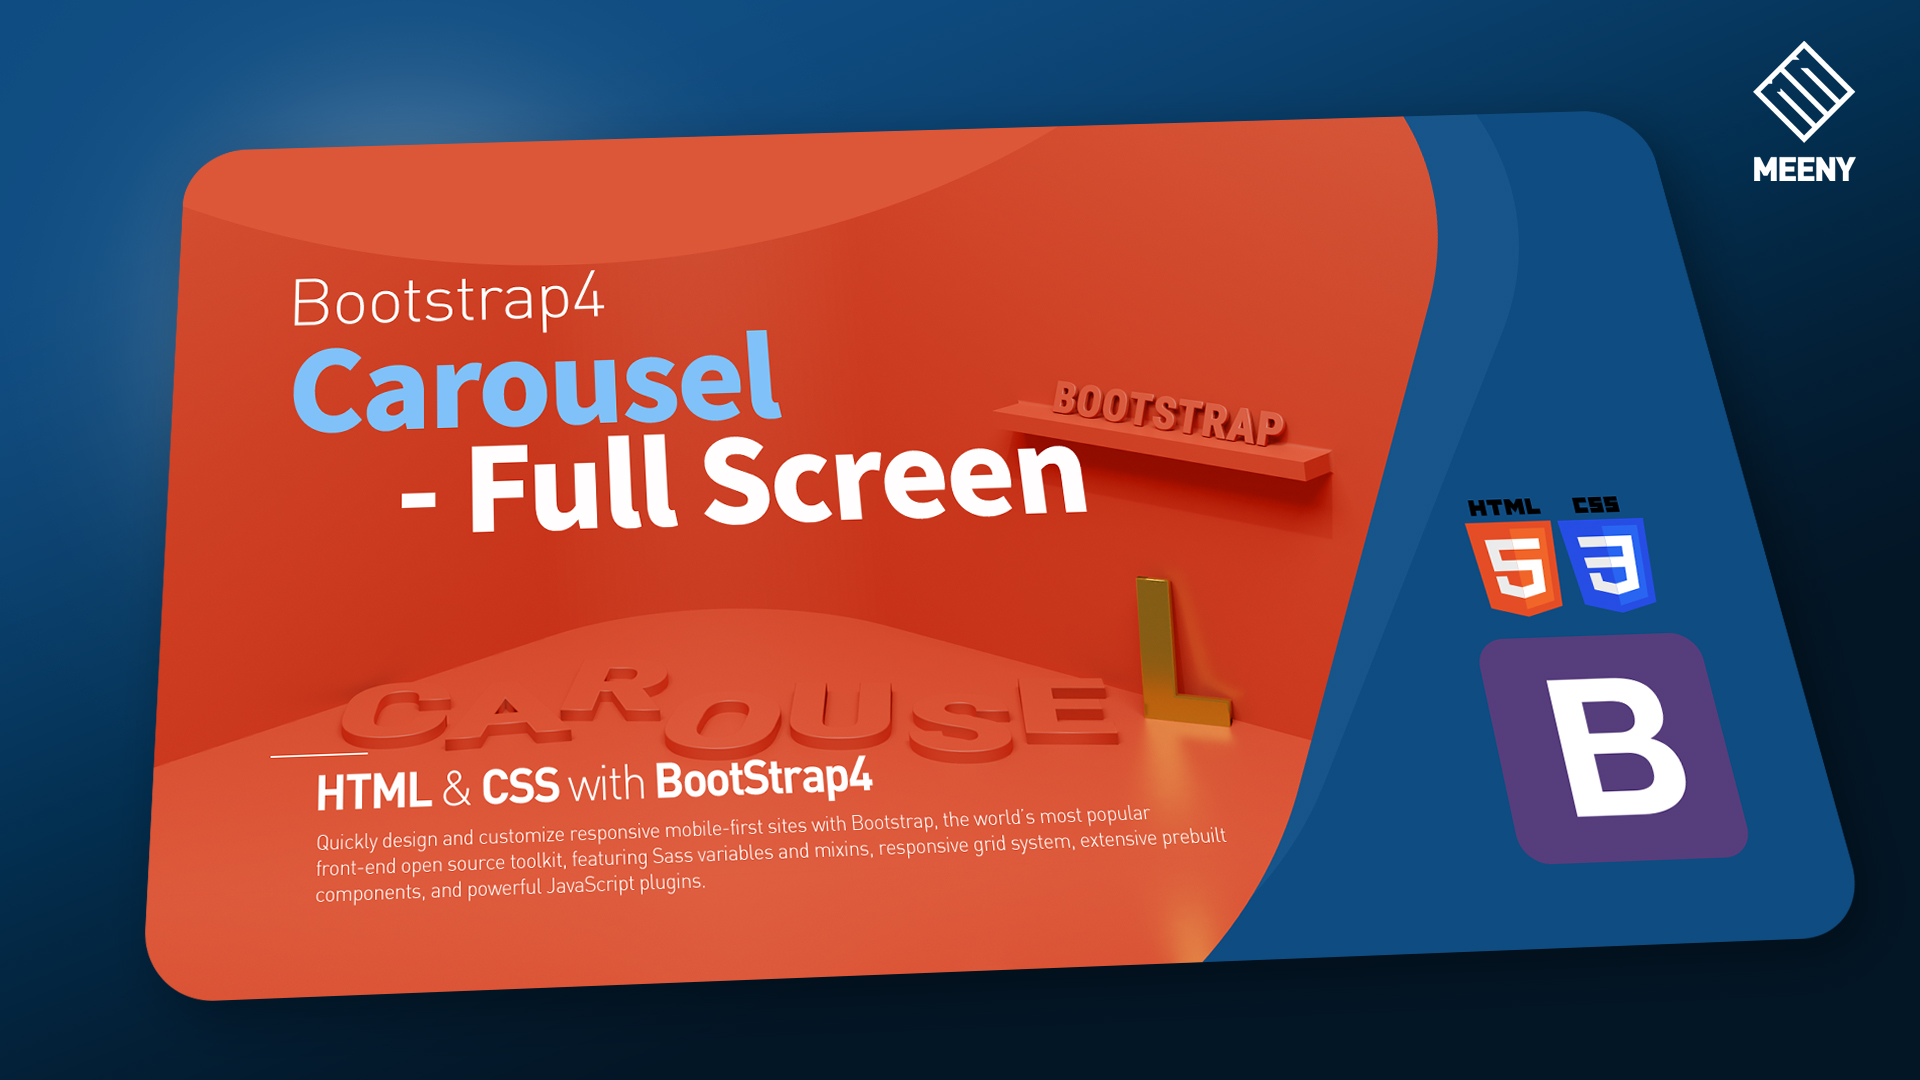 Bootstrap carousel. Bootstrap Карусель. Bootstrap 4 Carousel. Слайдер Bootstrap. Carousel Bootstrap html.